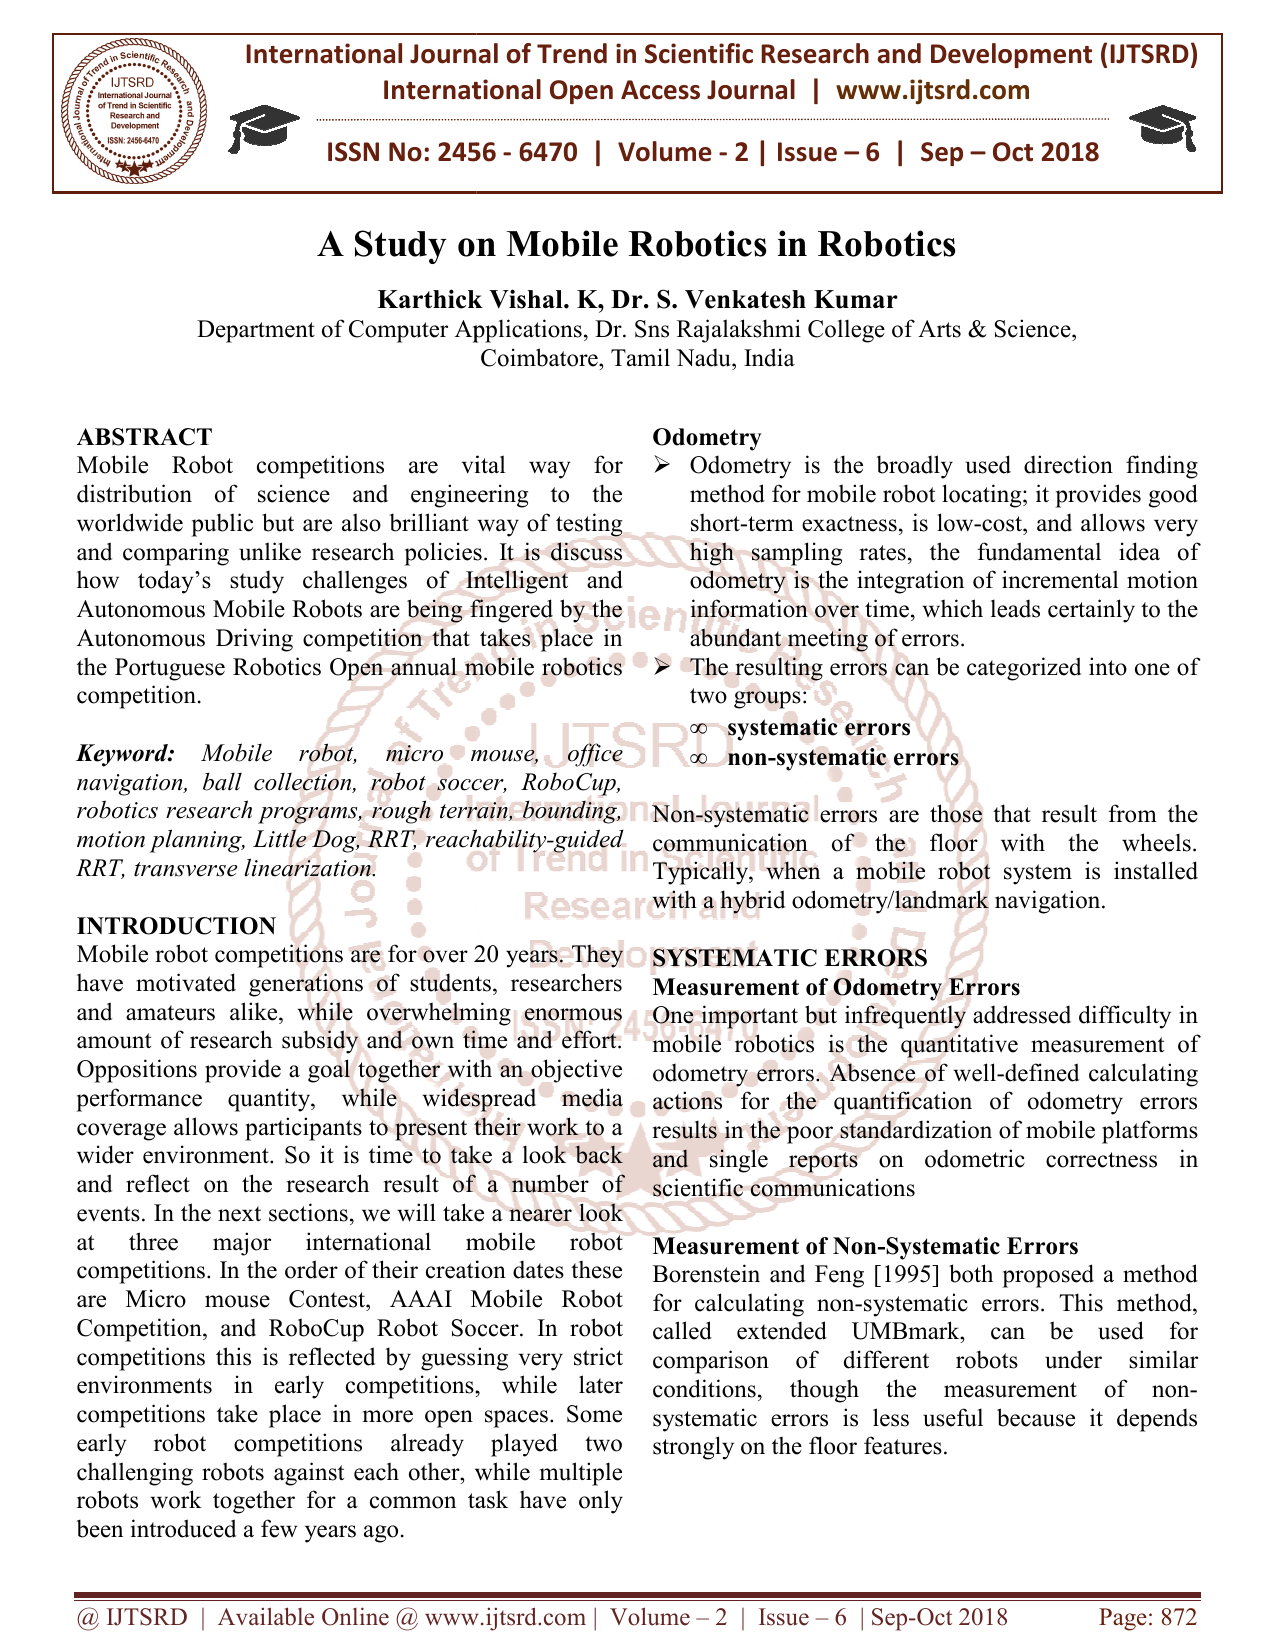 research papers on mobile robotics